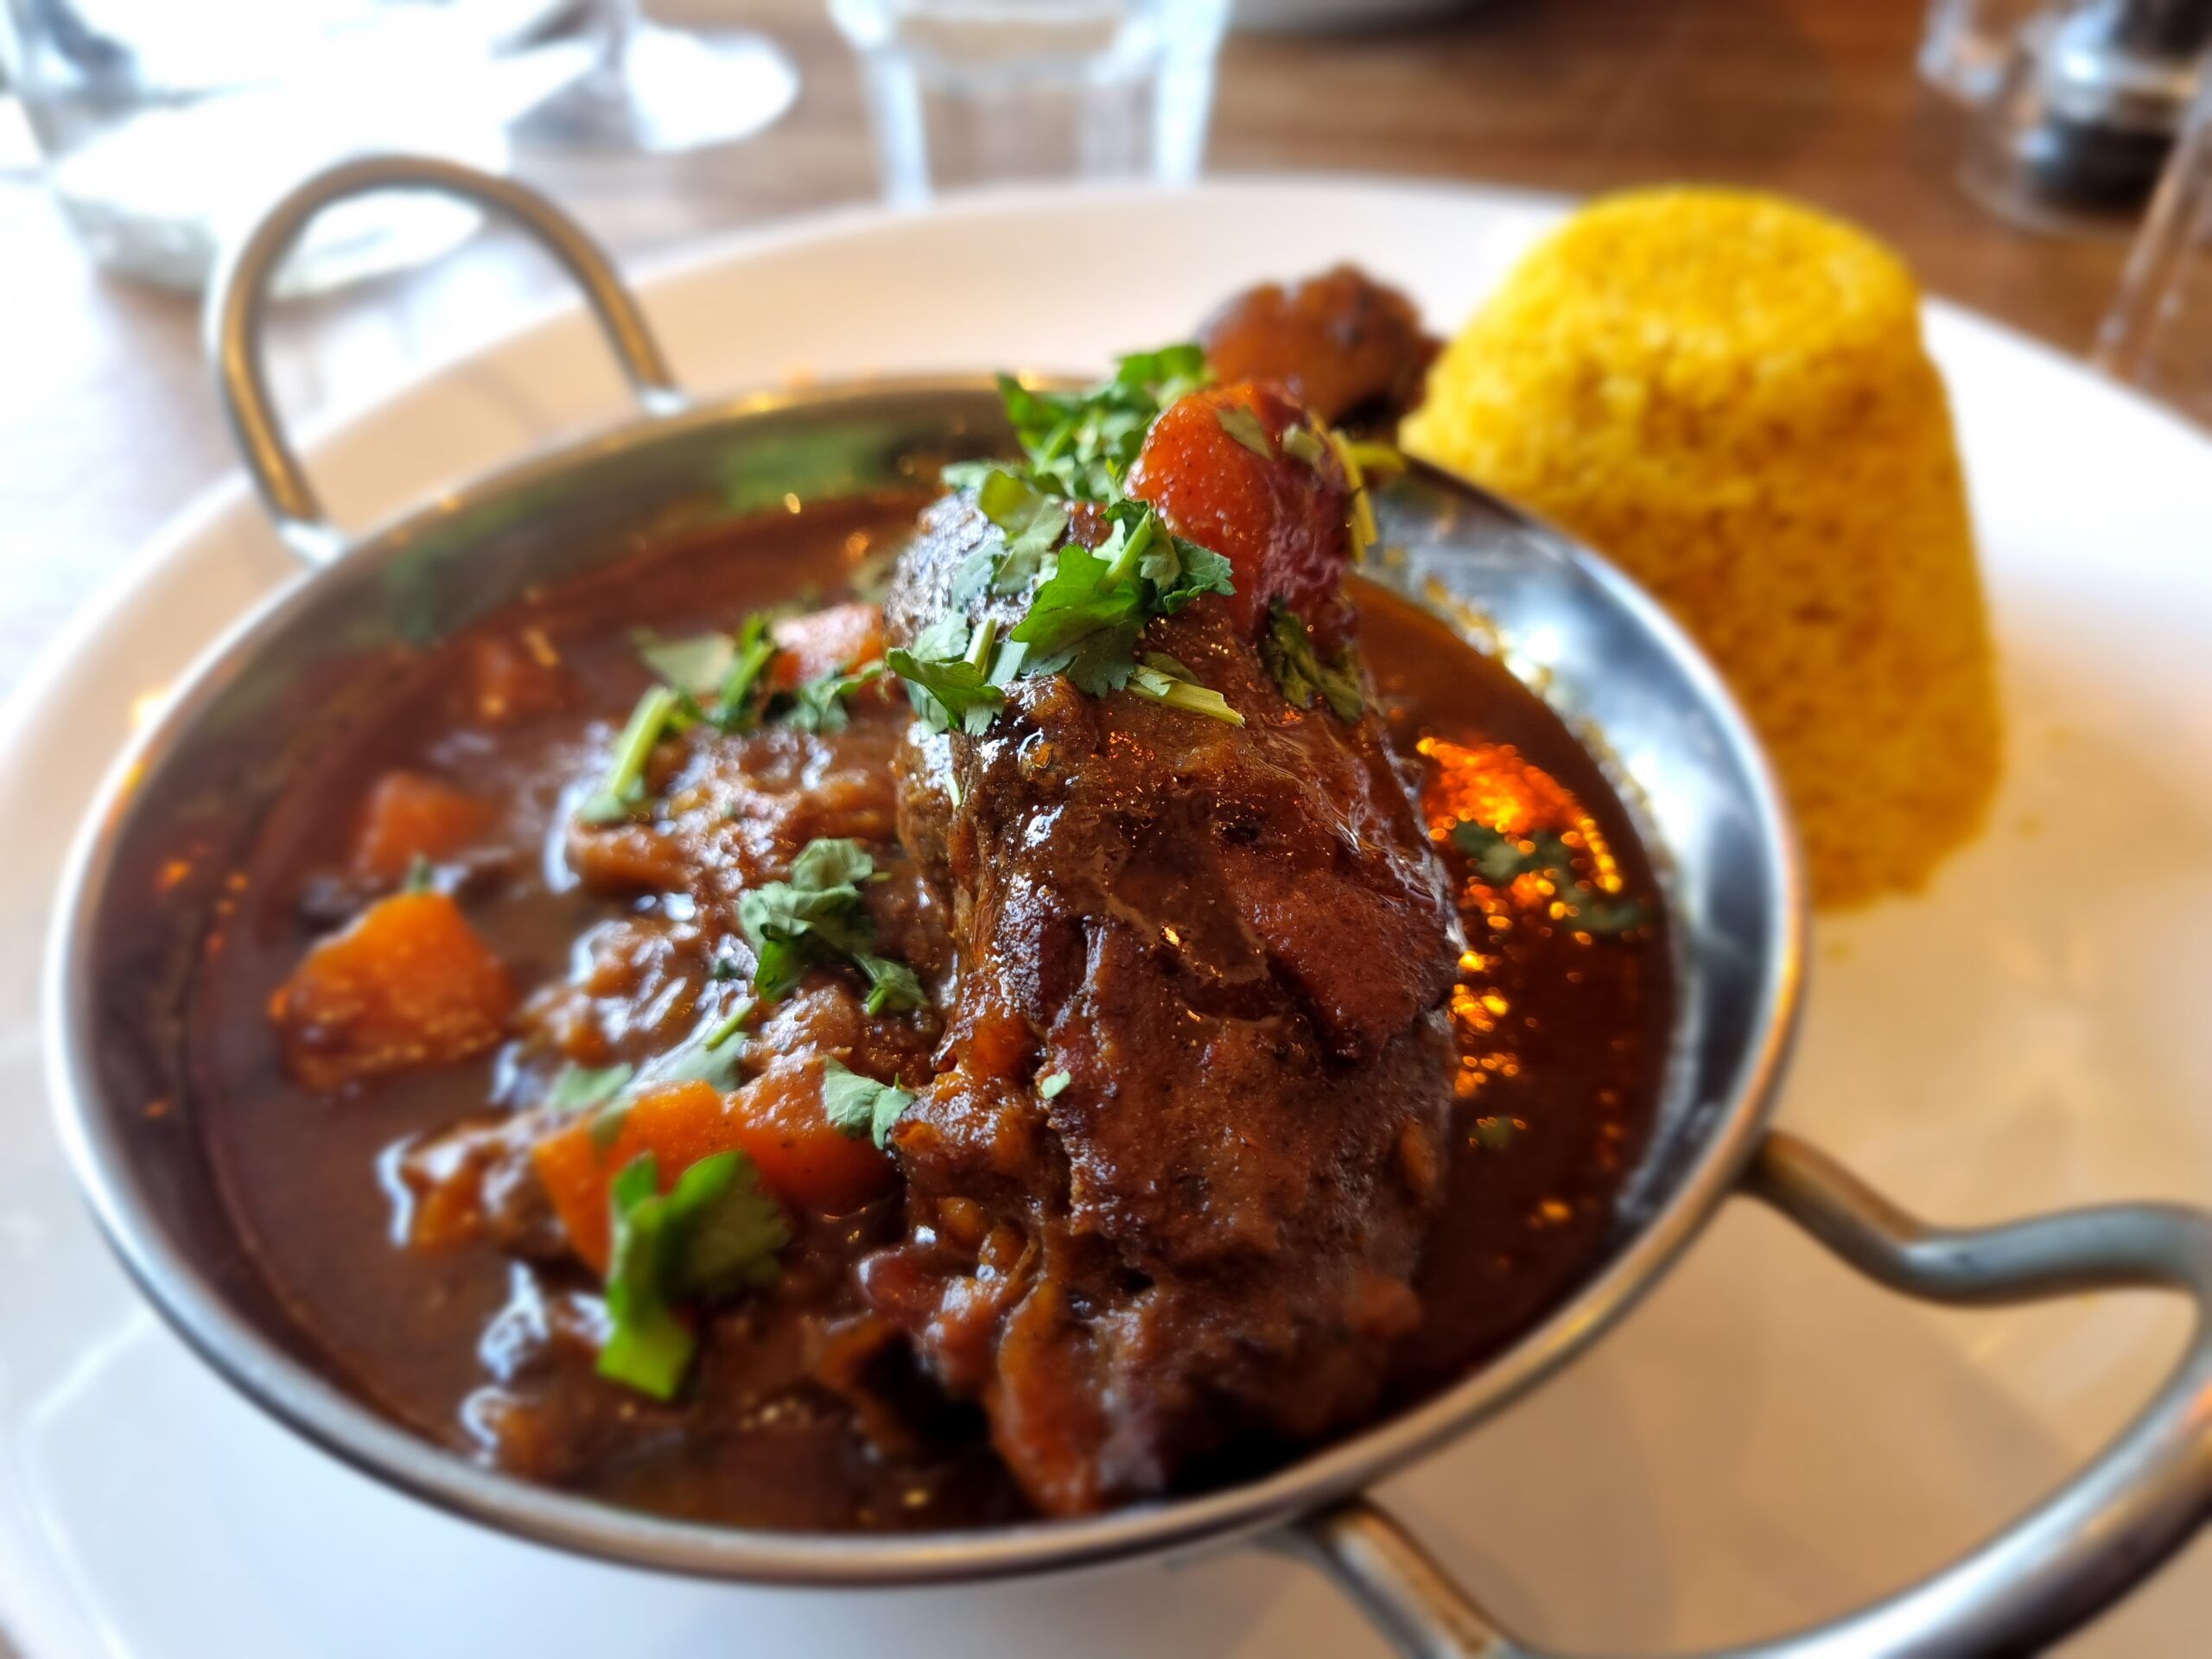 Duck Leg Tagine, a slowly braised duck leg with sweet and savoury Moroccan spices in a rich aromatic sauce